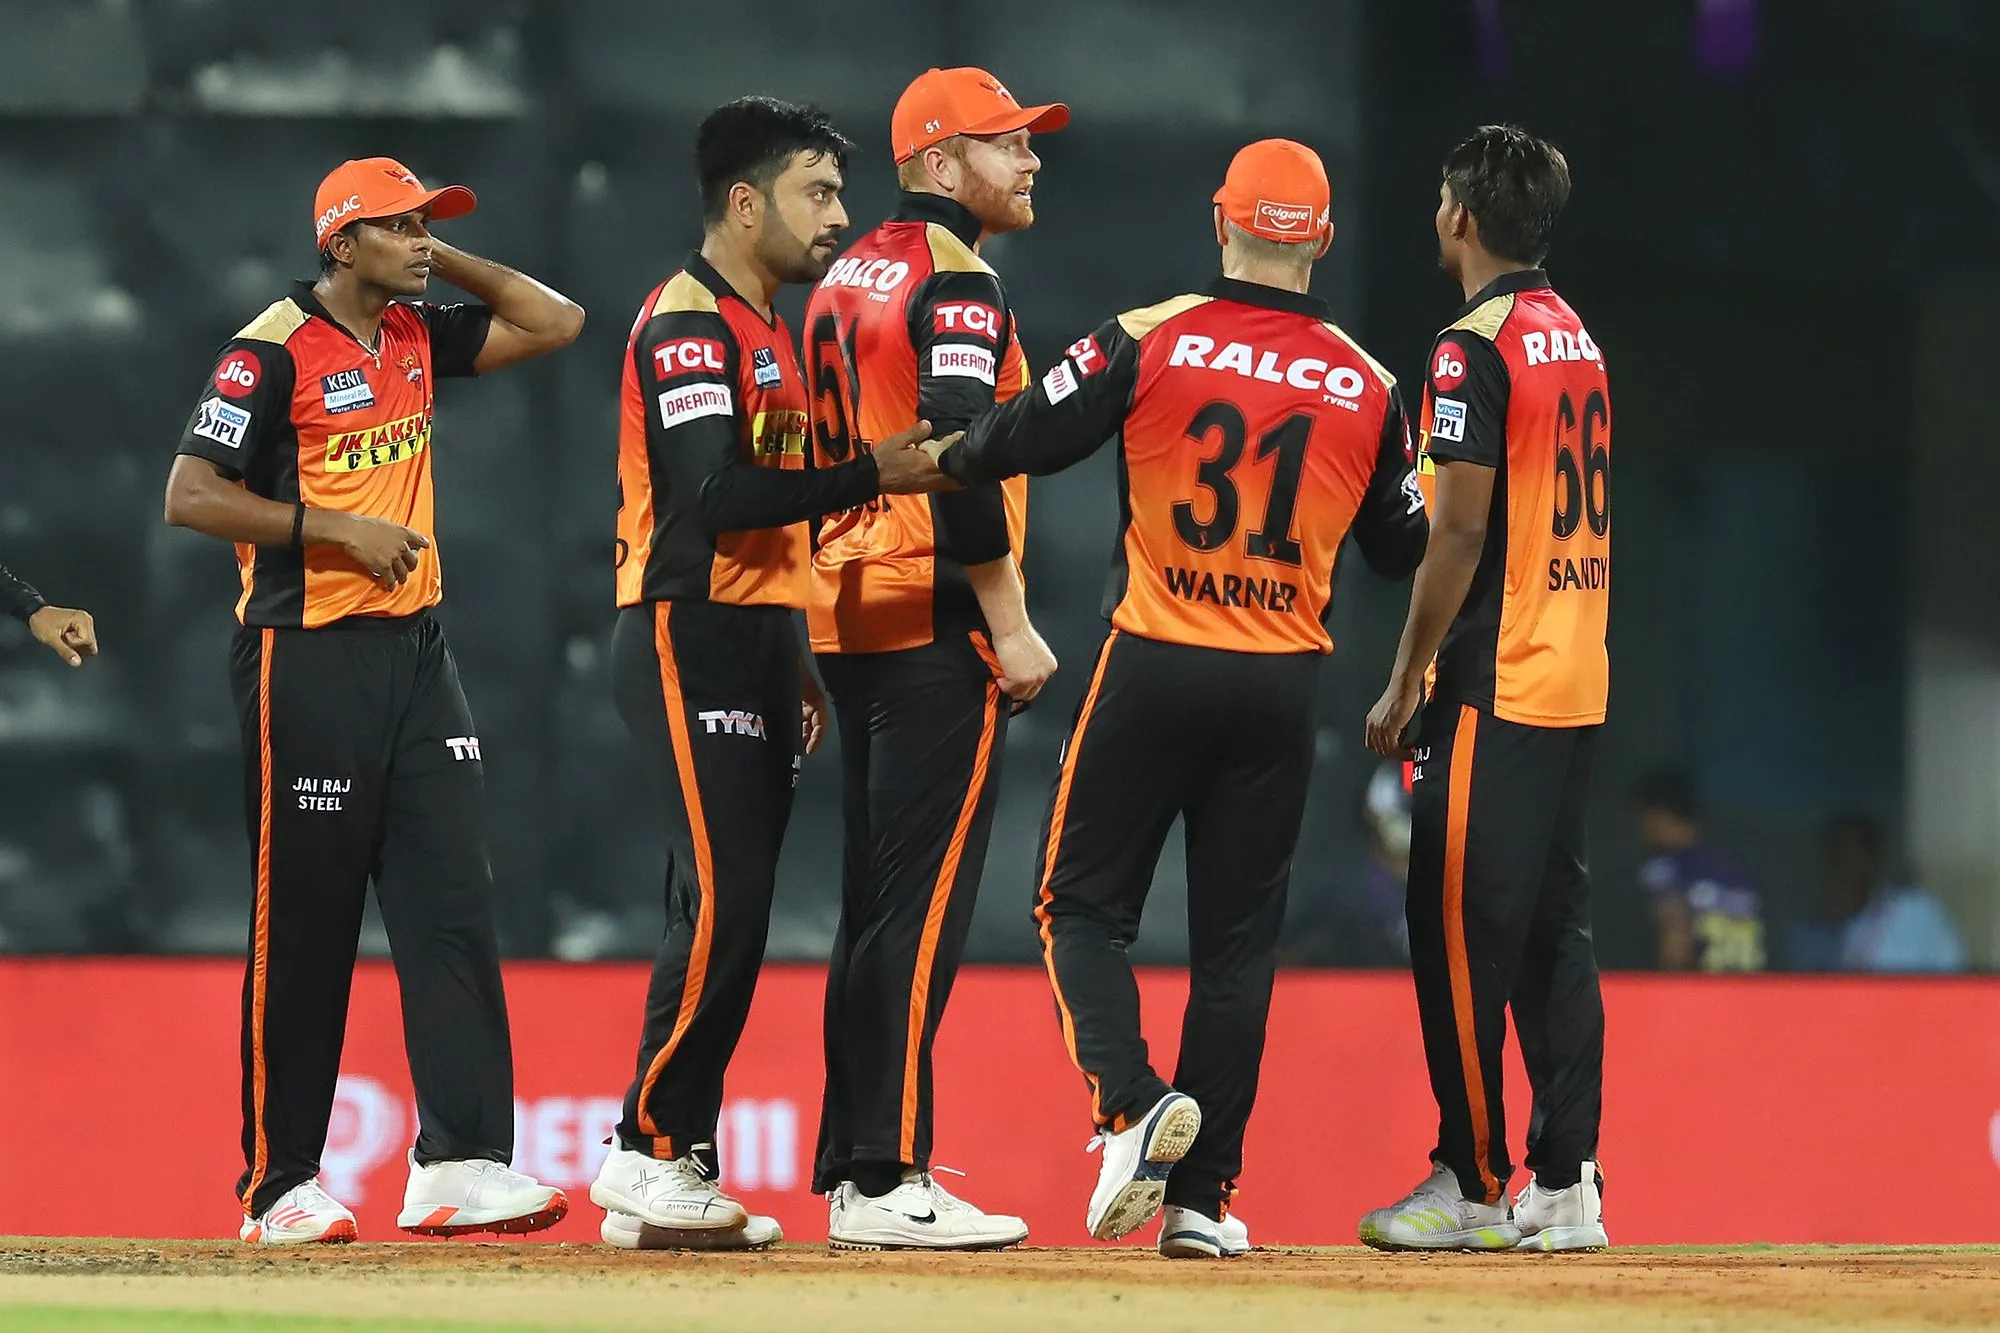 What we learnt from SRH’s disastrous showing - and should they be concerned from the defeat against KKR